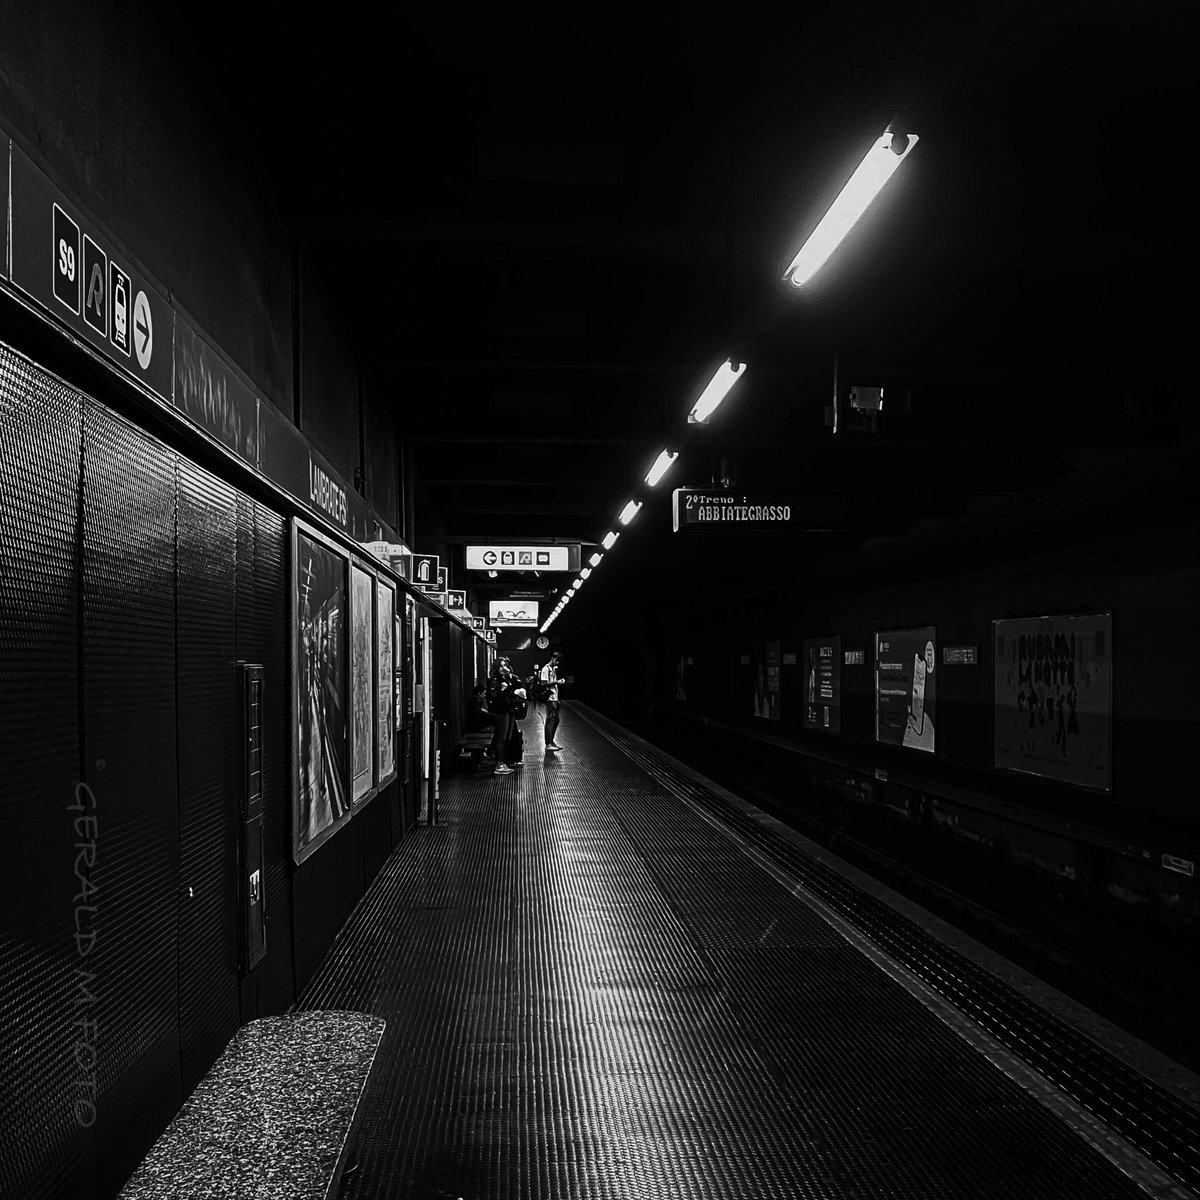 [ Early Commuter ] #shotoniphone by our youngest in Milano this week #streetsnaps #blackandwhitephotography #bnwphotography #streetphotography #Monochrome #urbanphotography #architecturephotography #blackandwhitephoto #ThePhotoHour #FineArtPhotography #urban_addicts #lowkey